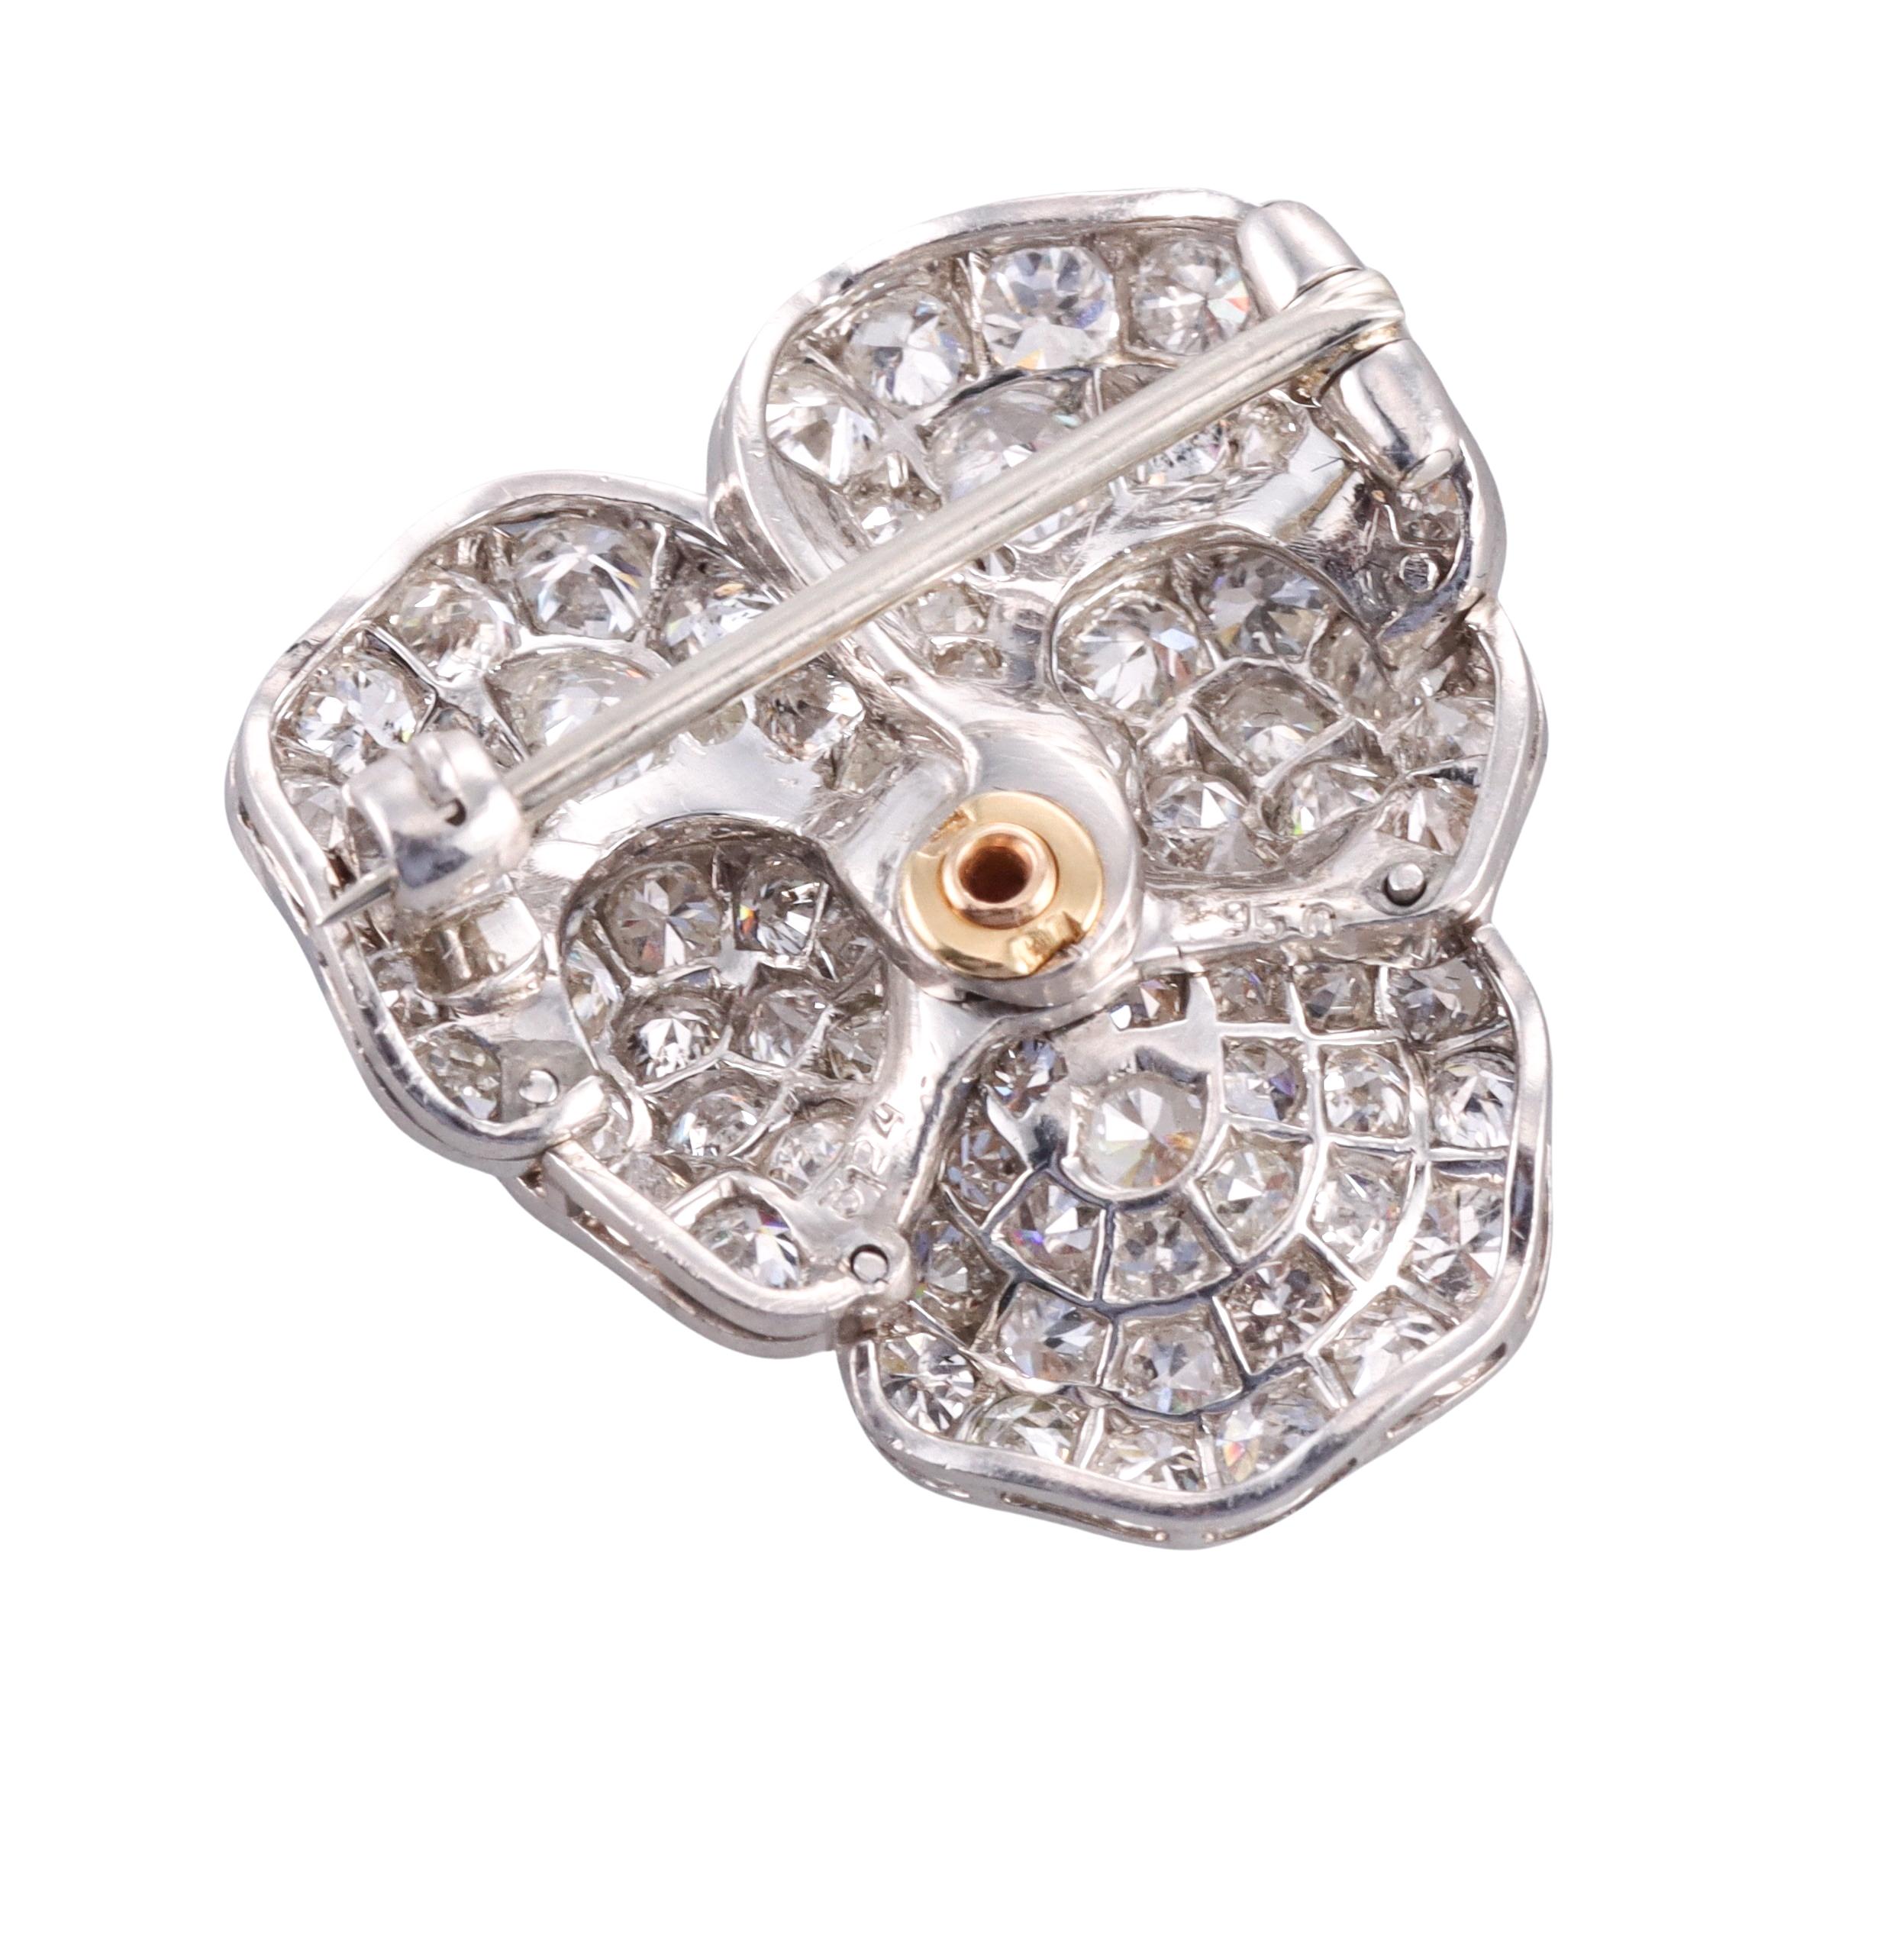 Delicate platinum pansy flower brooch, featuring center oval fancy yellow diamond - approx. 0.40ct, surrounded with five petals , set with a total of approx. 3.40ctw G/VS-Si diamonds. Brooch measures 1